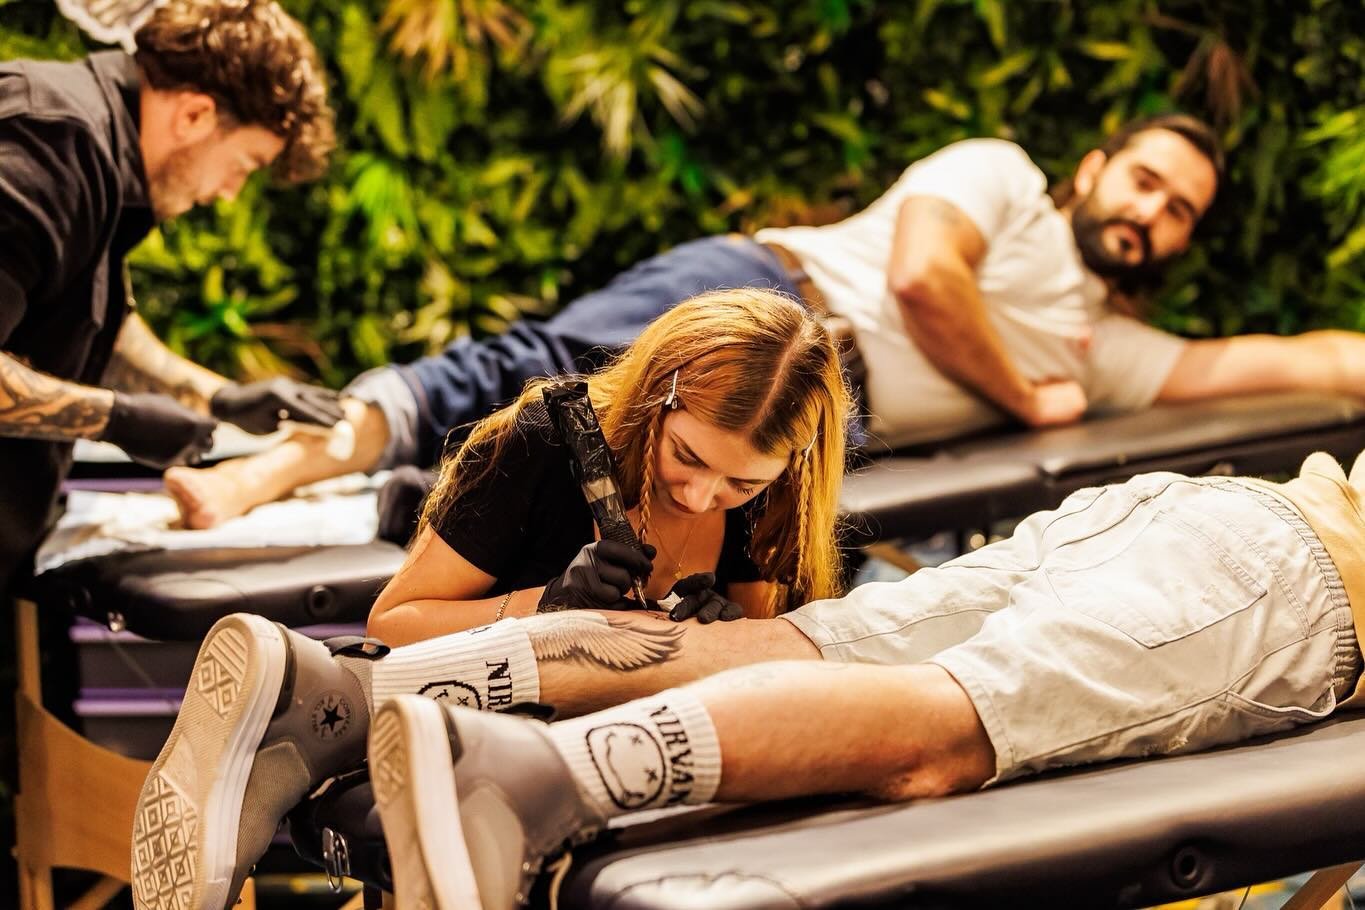 ✍️Tattoos are back at Froth Town thanks to the legends at @inkcarts &amp; @piratelifebeer 

The tattoo parlour will have over 50 designs to choose from &amp; extra tattoo artists this year ✍️
🍻 Alongside an absolutely epic lineup of beers from Pirat